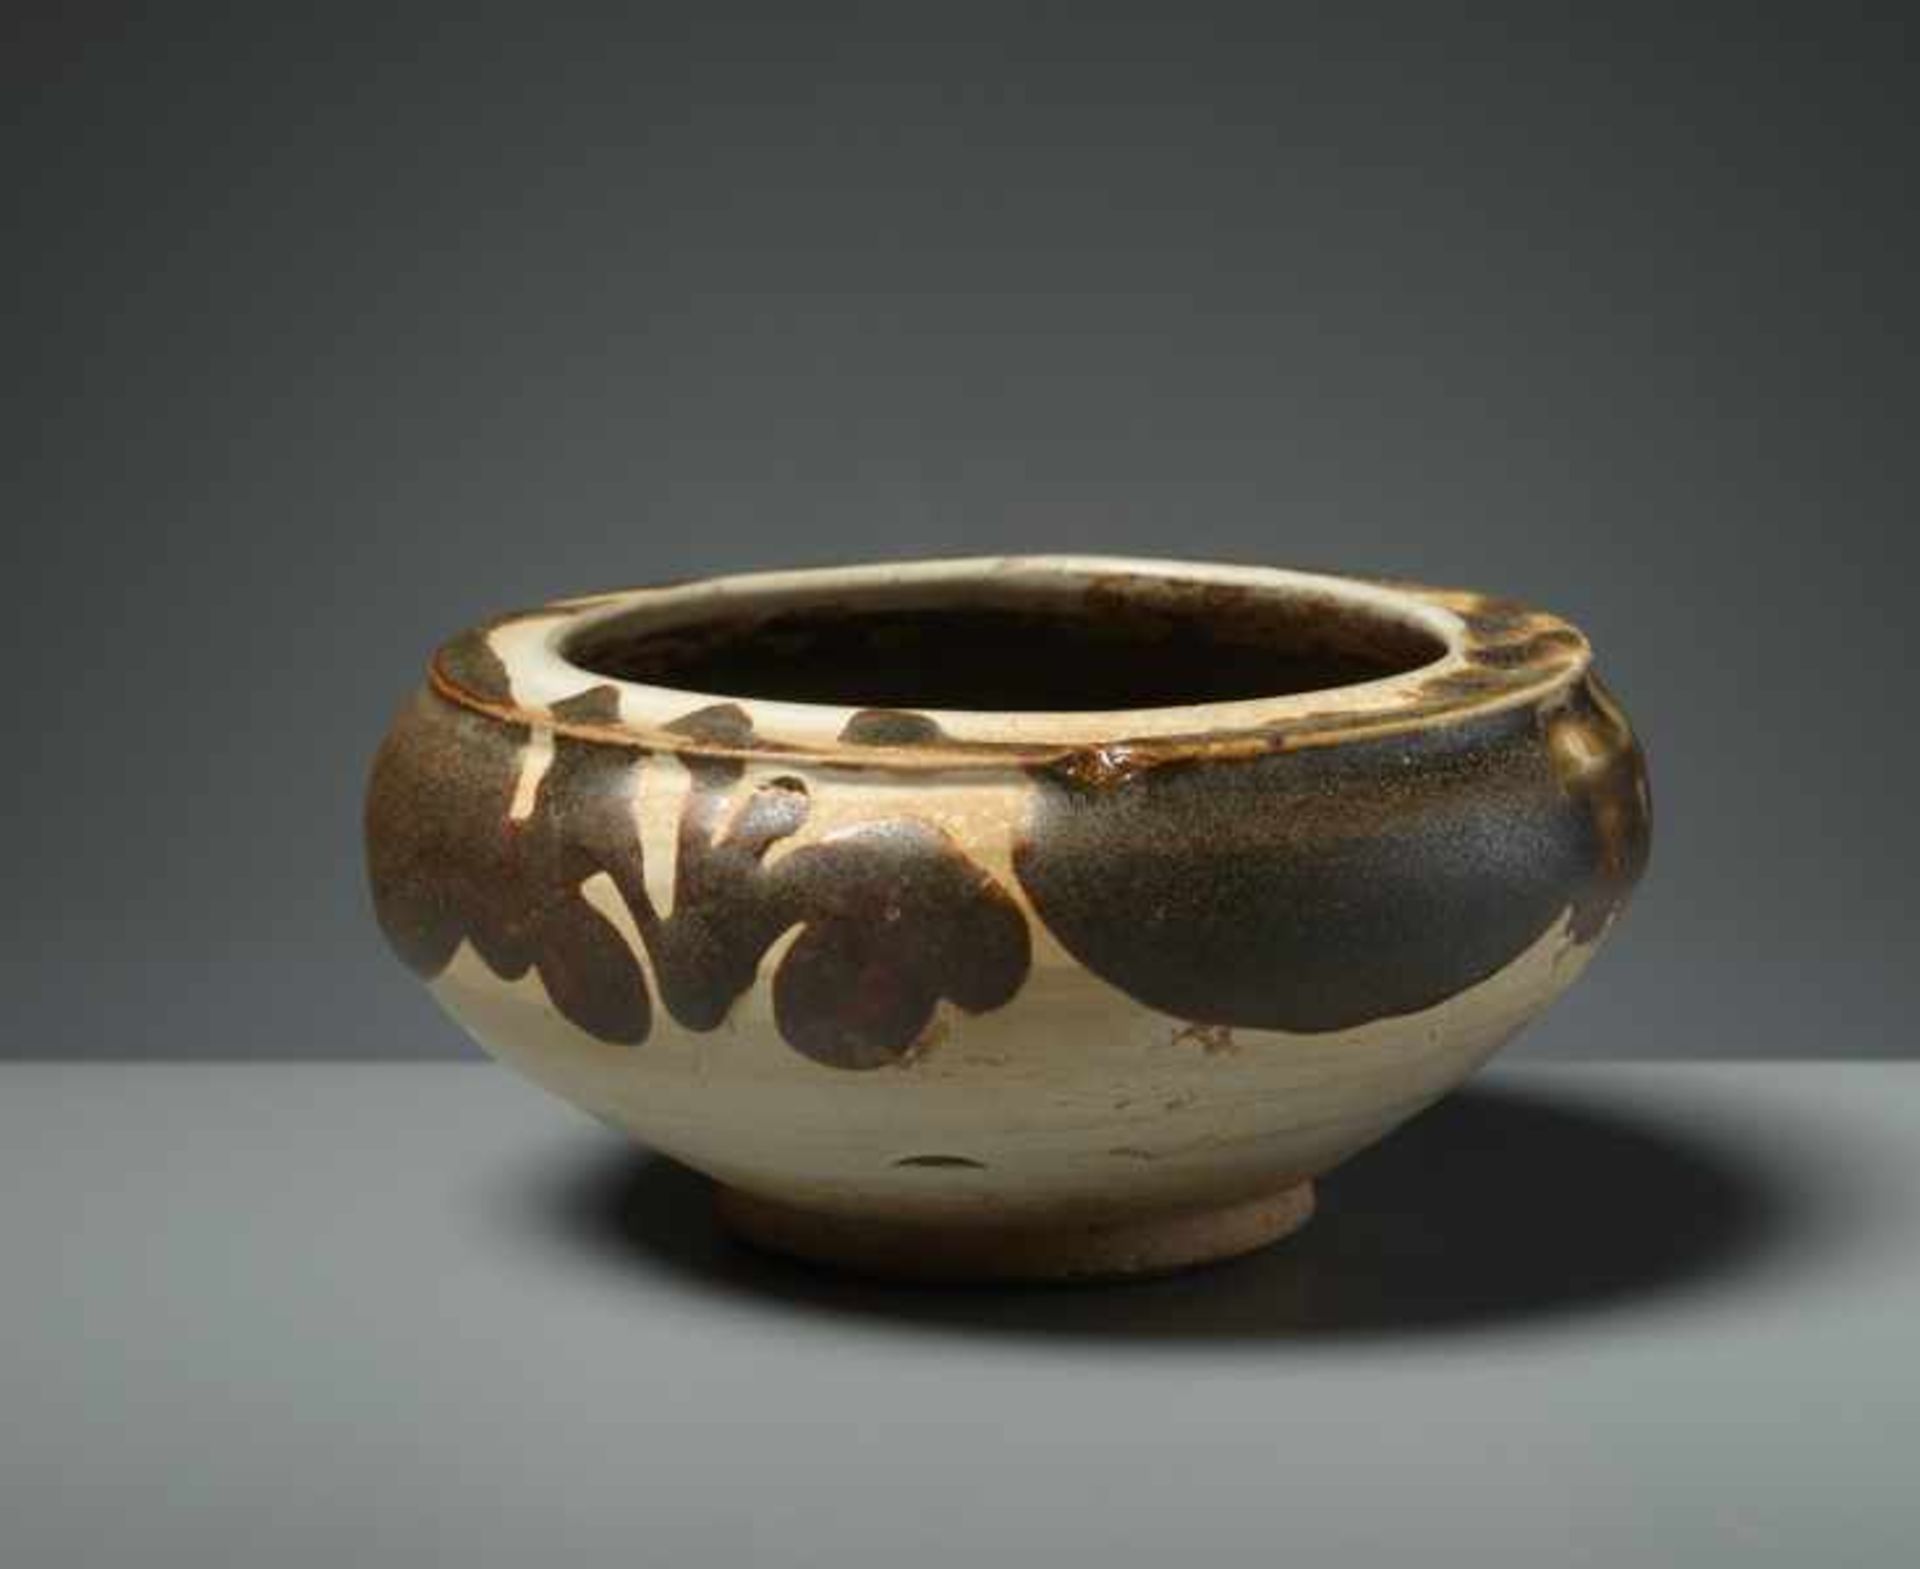 SMALL BOWL Glazed ceramic. China, Ming to Qing dynastyThe small bowl, a water container for the